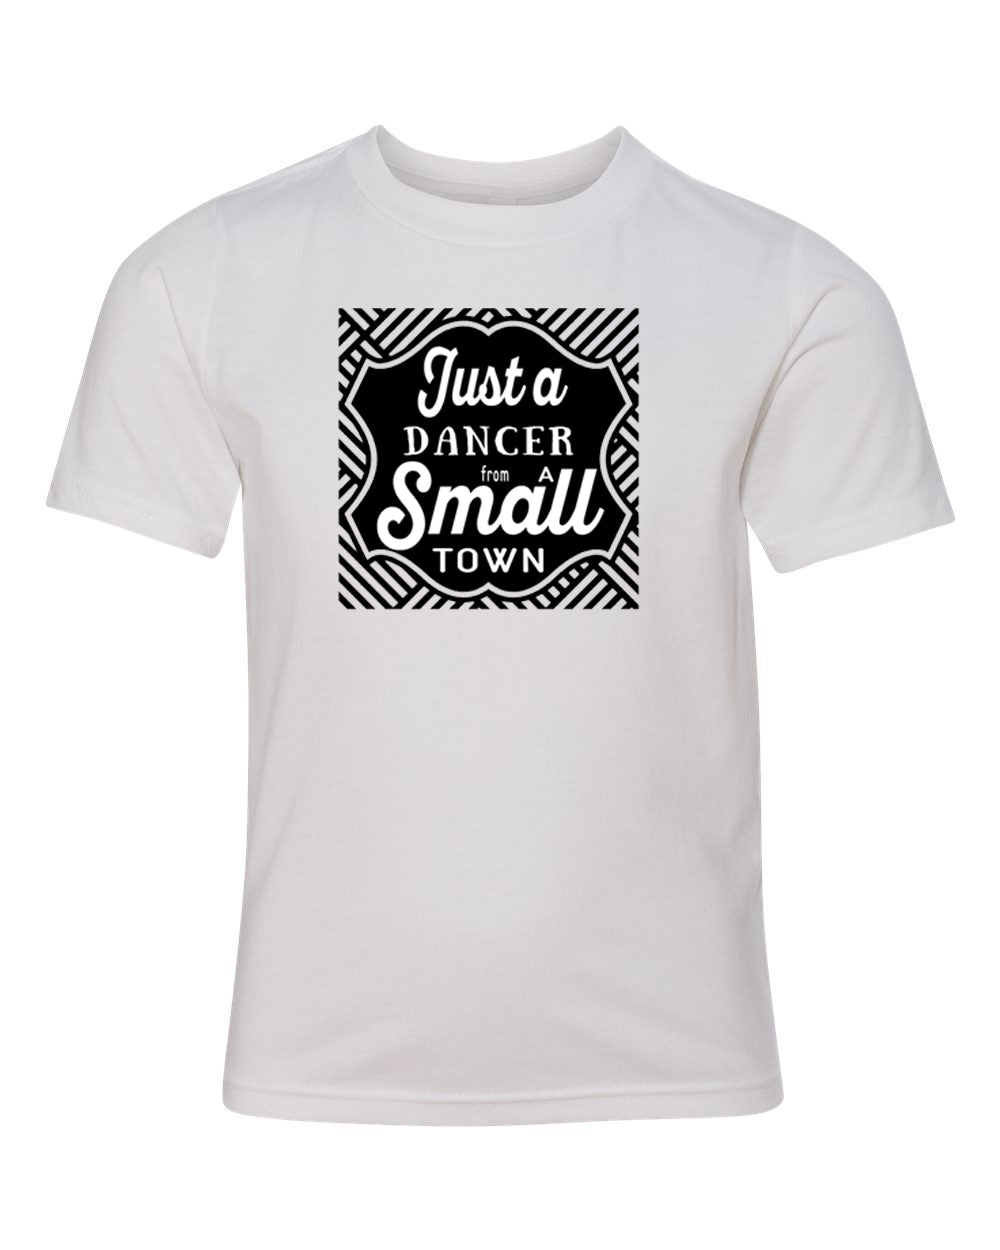 Just A Dancer From A Small Town Youth T-Shirt White